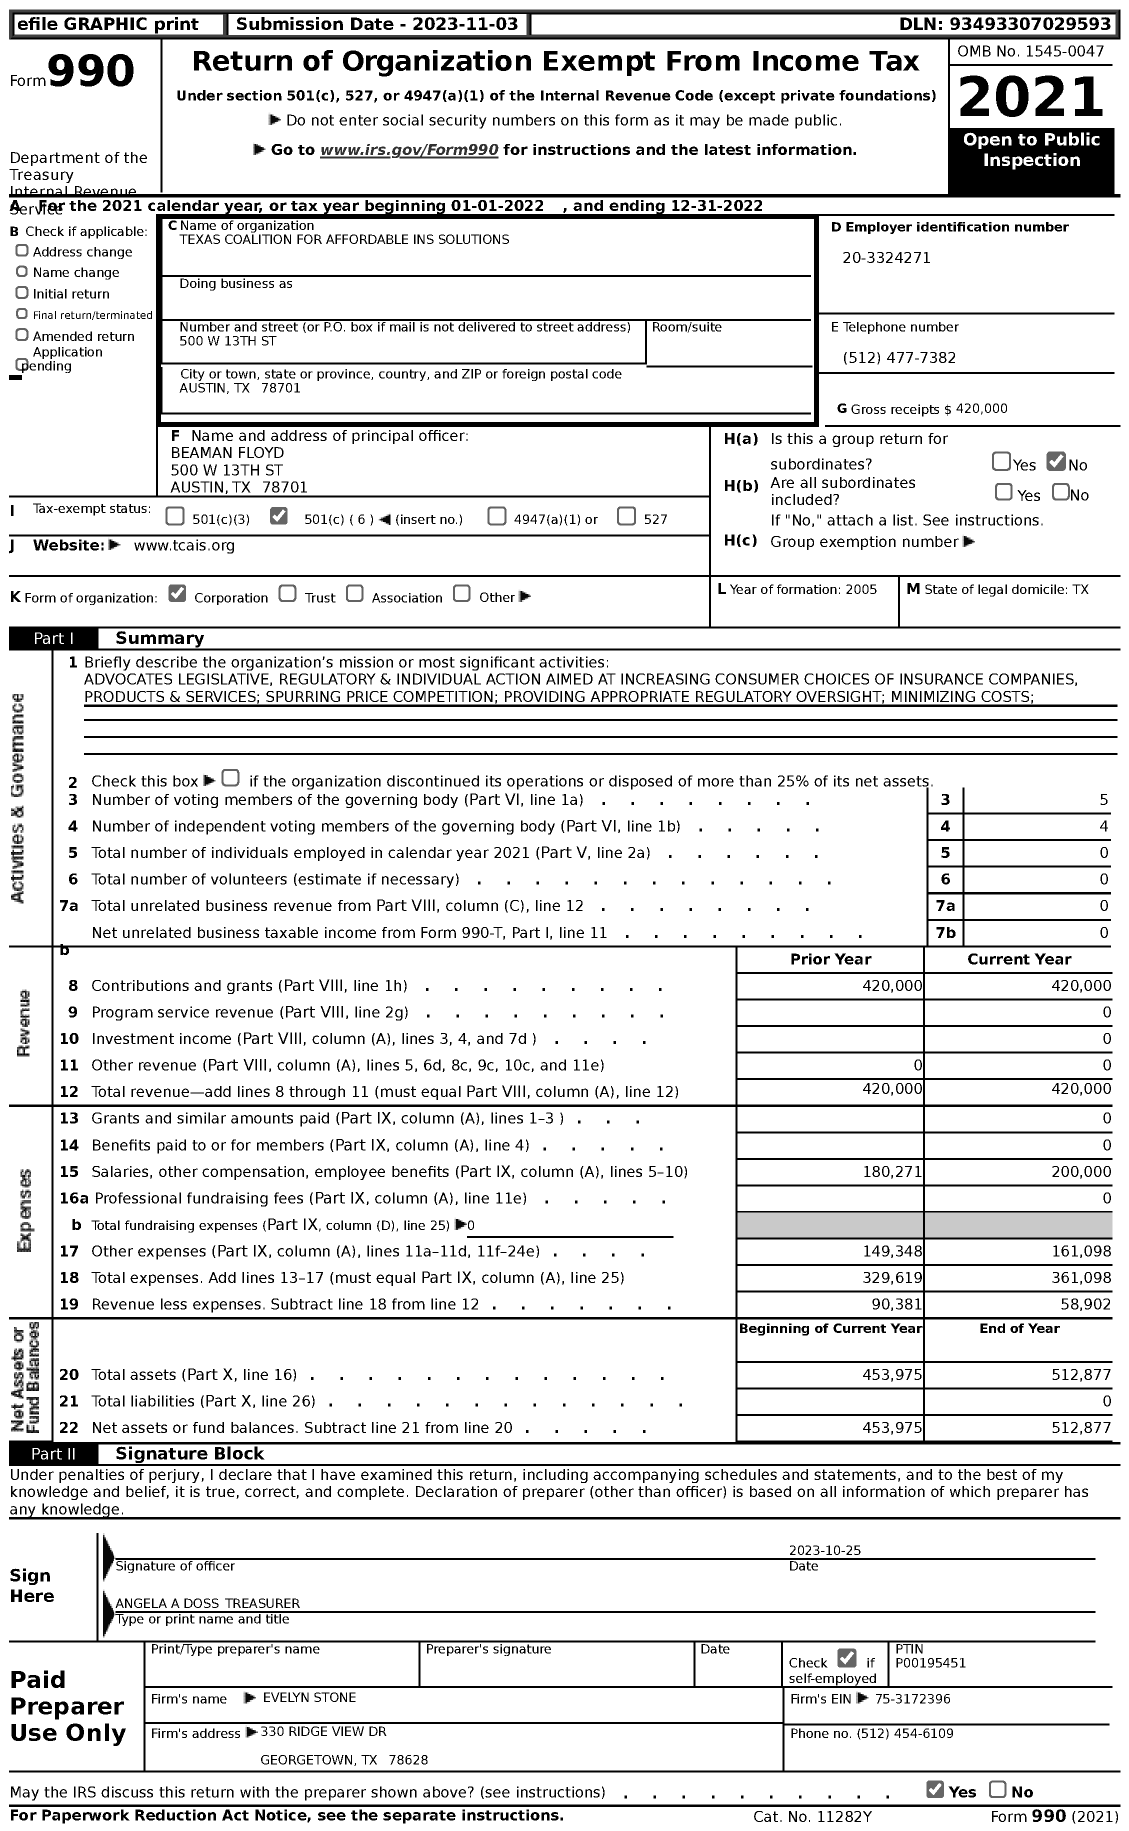 Image of first page of 2022 Form 990 for Texas Coalition for Affordable Ins Solutions